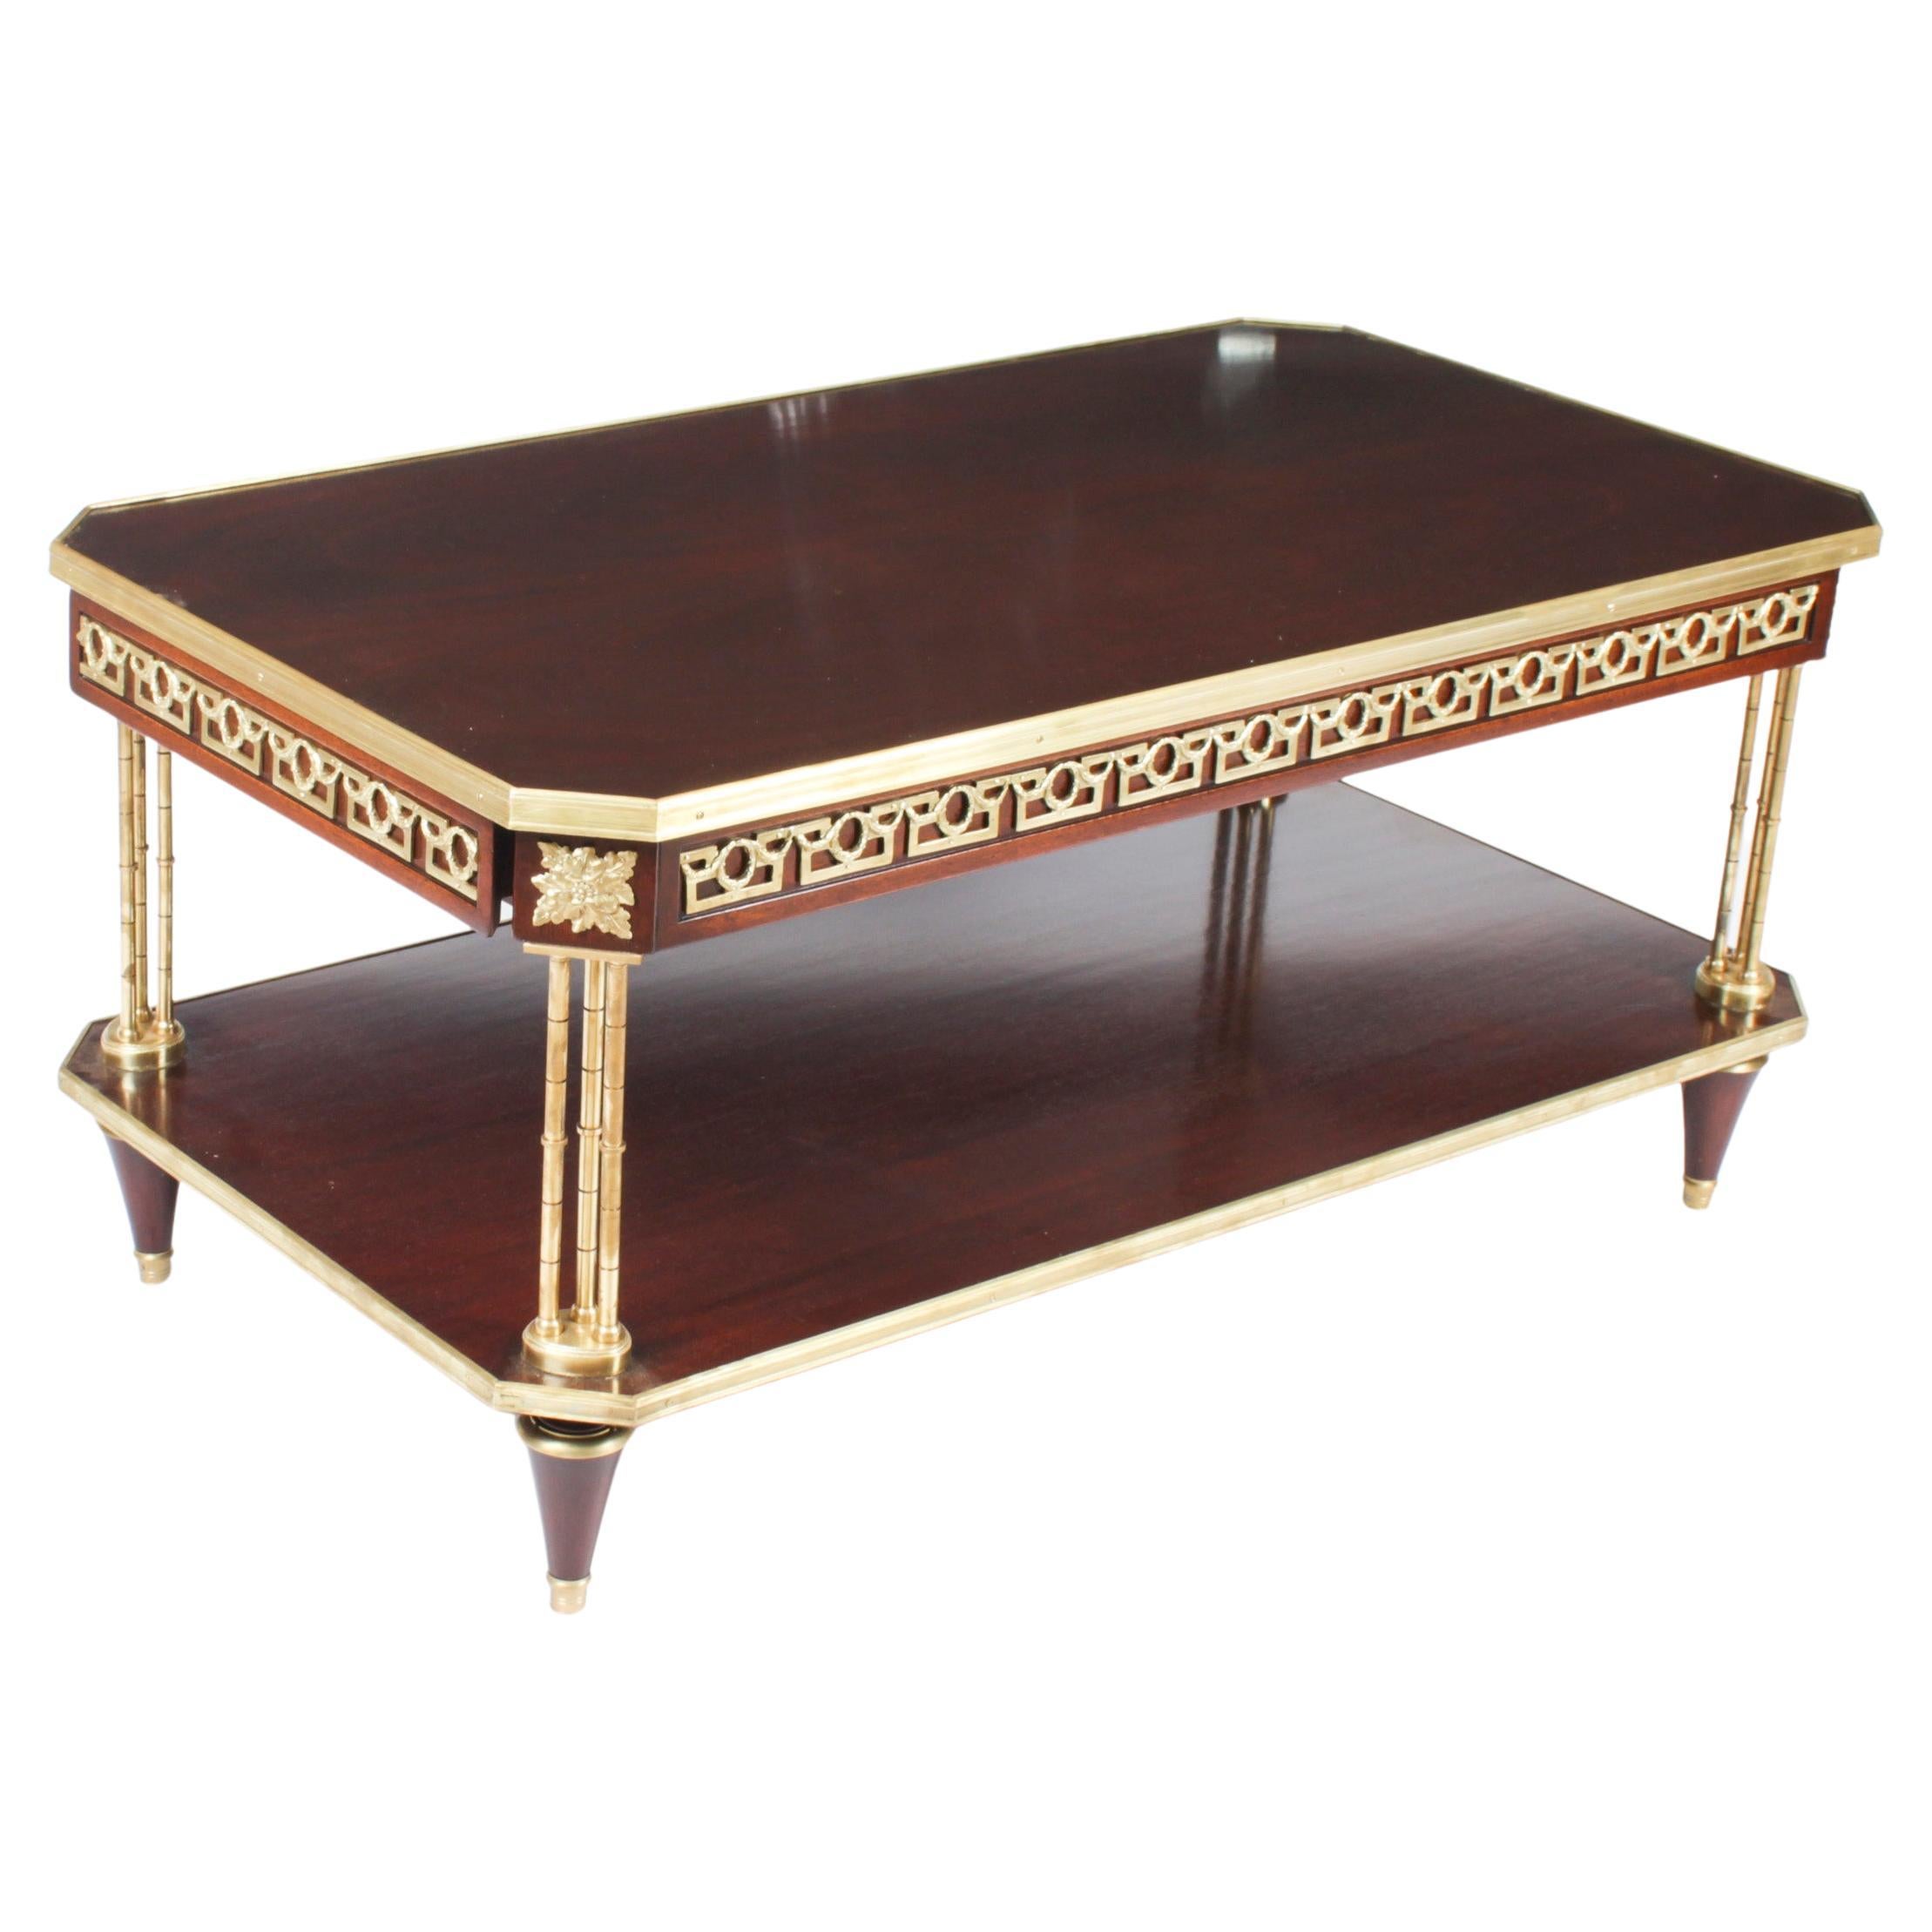 Vintage French Louis Revival Ormolu Mounted Coffee Table 20th C